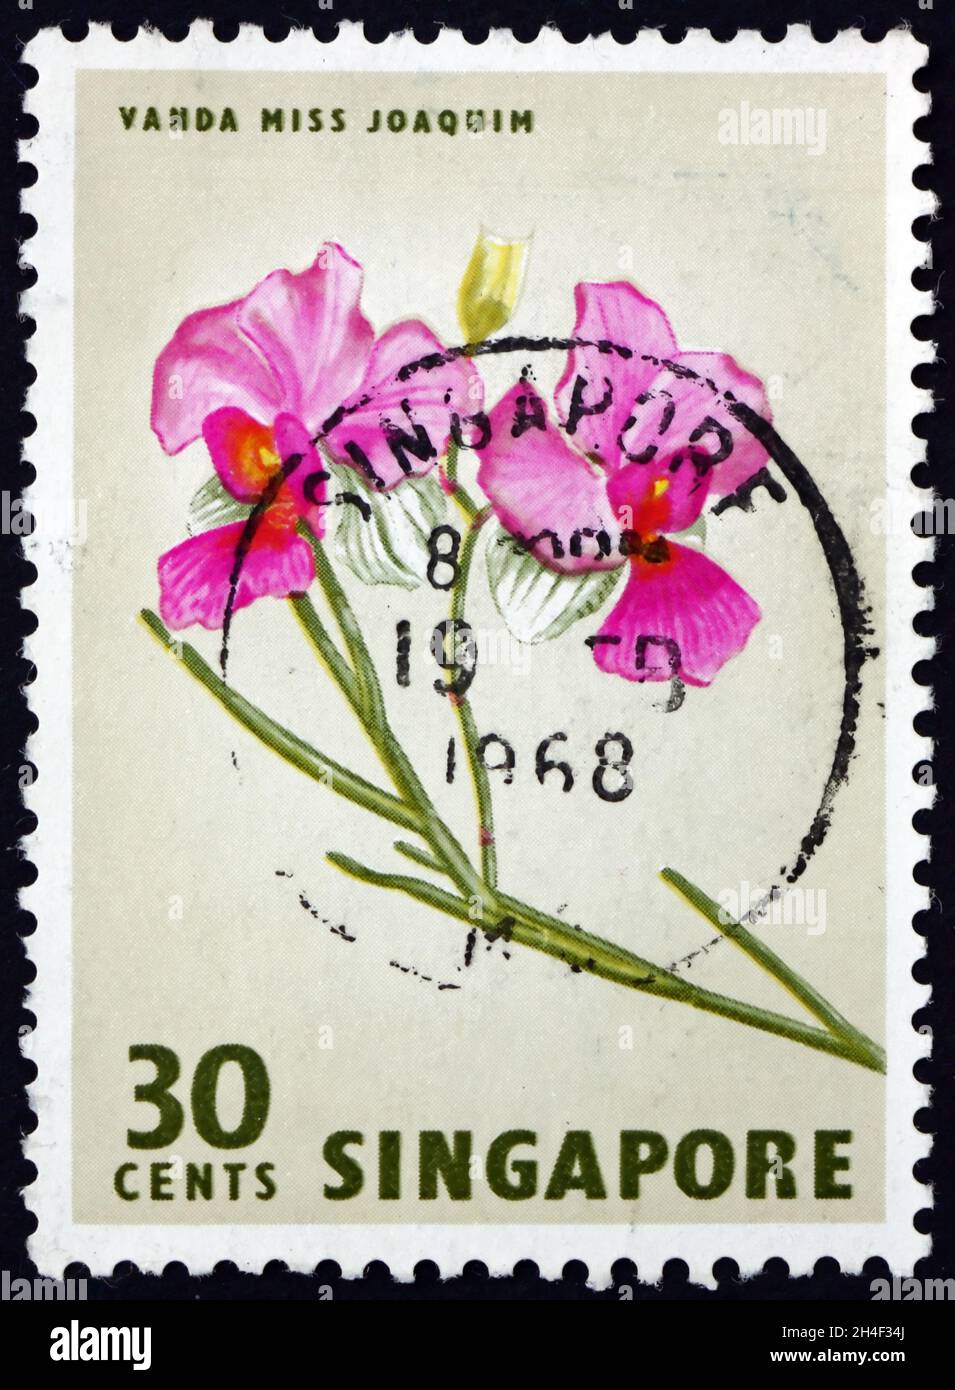 SINGAPORE - CIRCA 1963: a stamp printed in Singapore shows Vanda Miss Joaquim, is a hybrid orchid cultivar that is Singapore’s national flower, circa Stock Photo